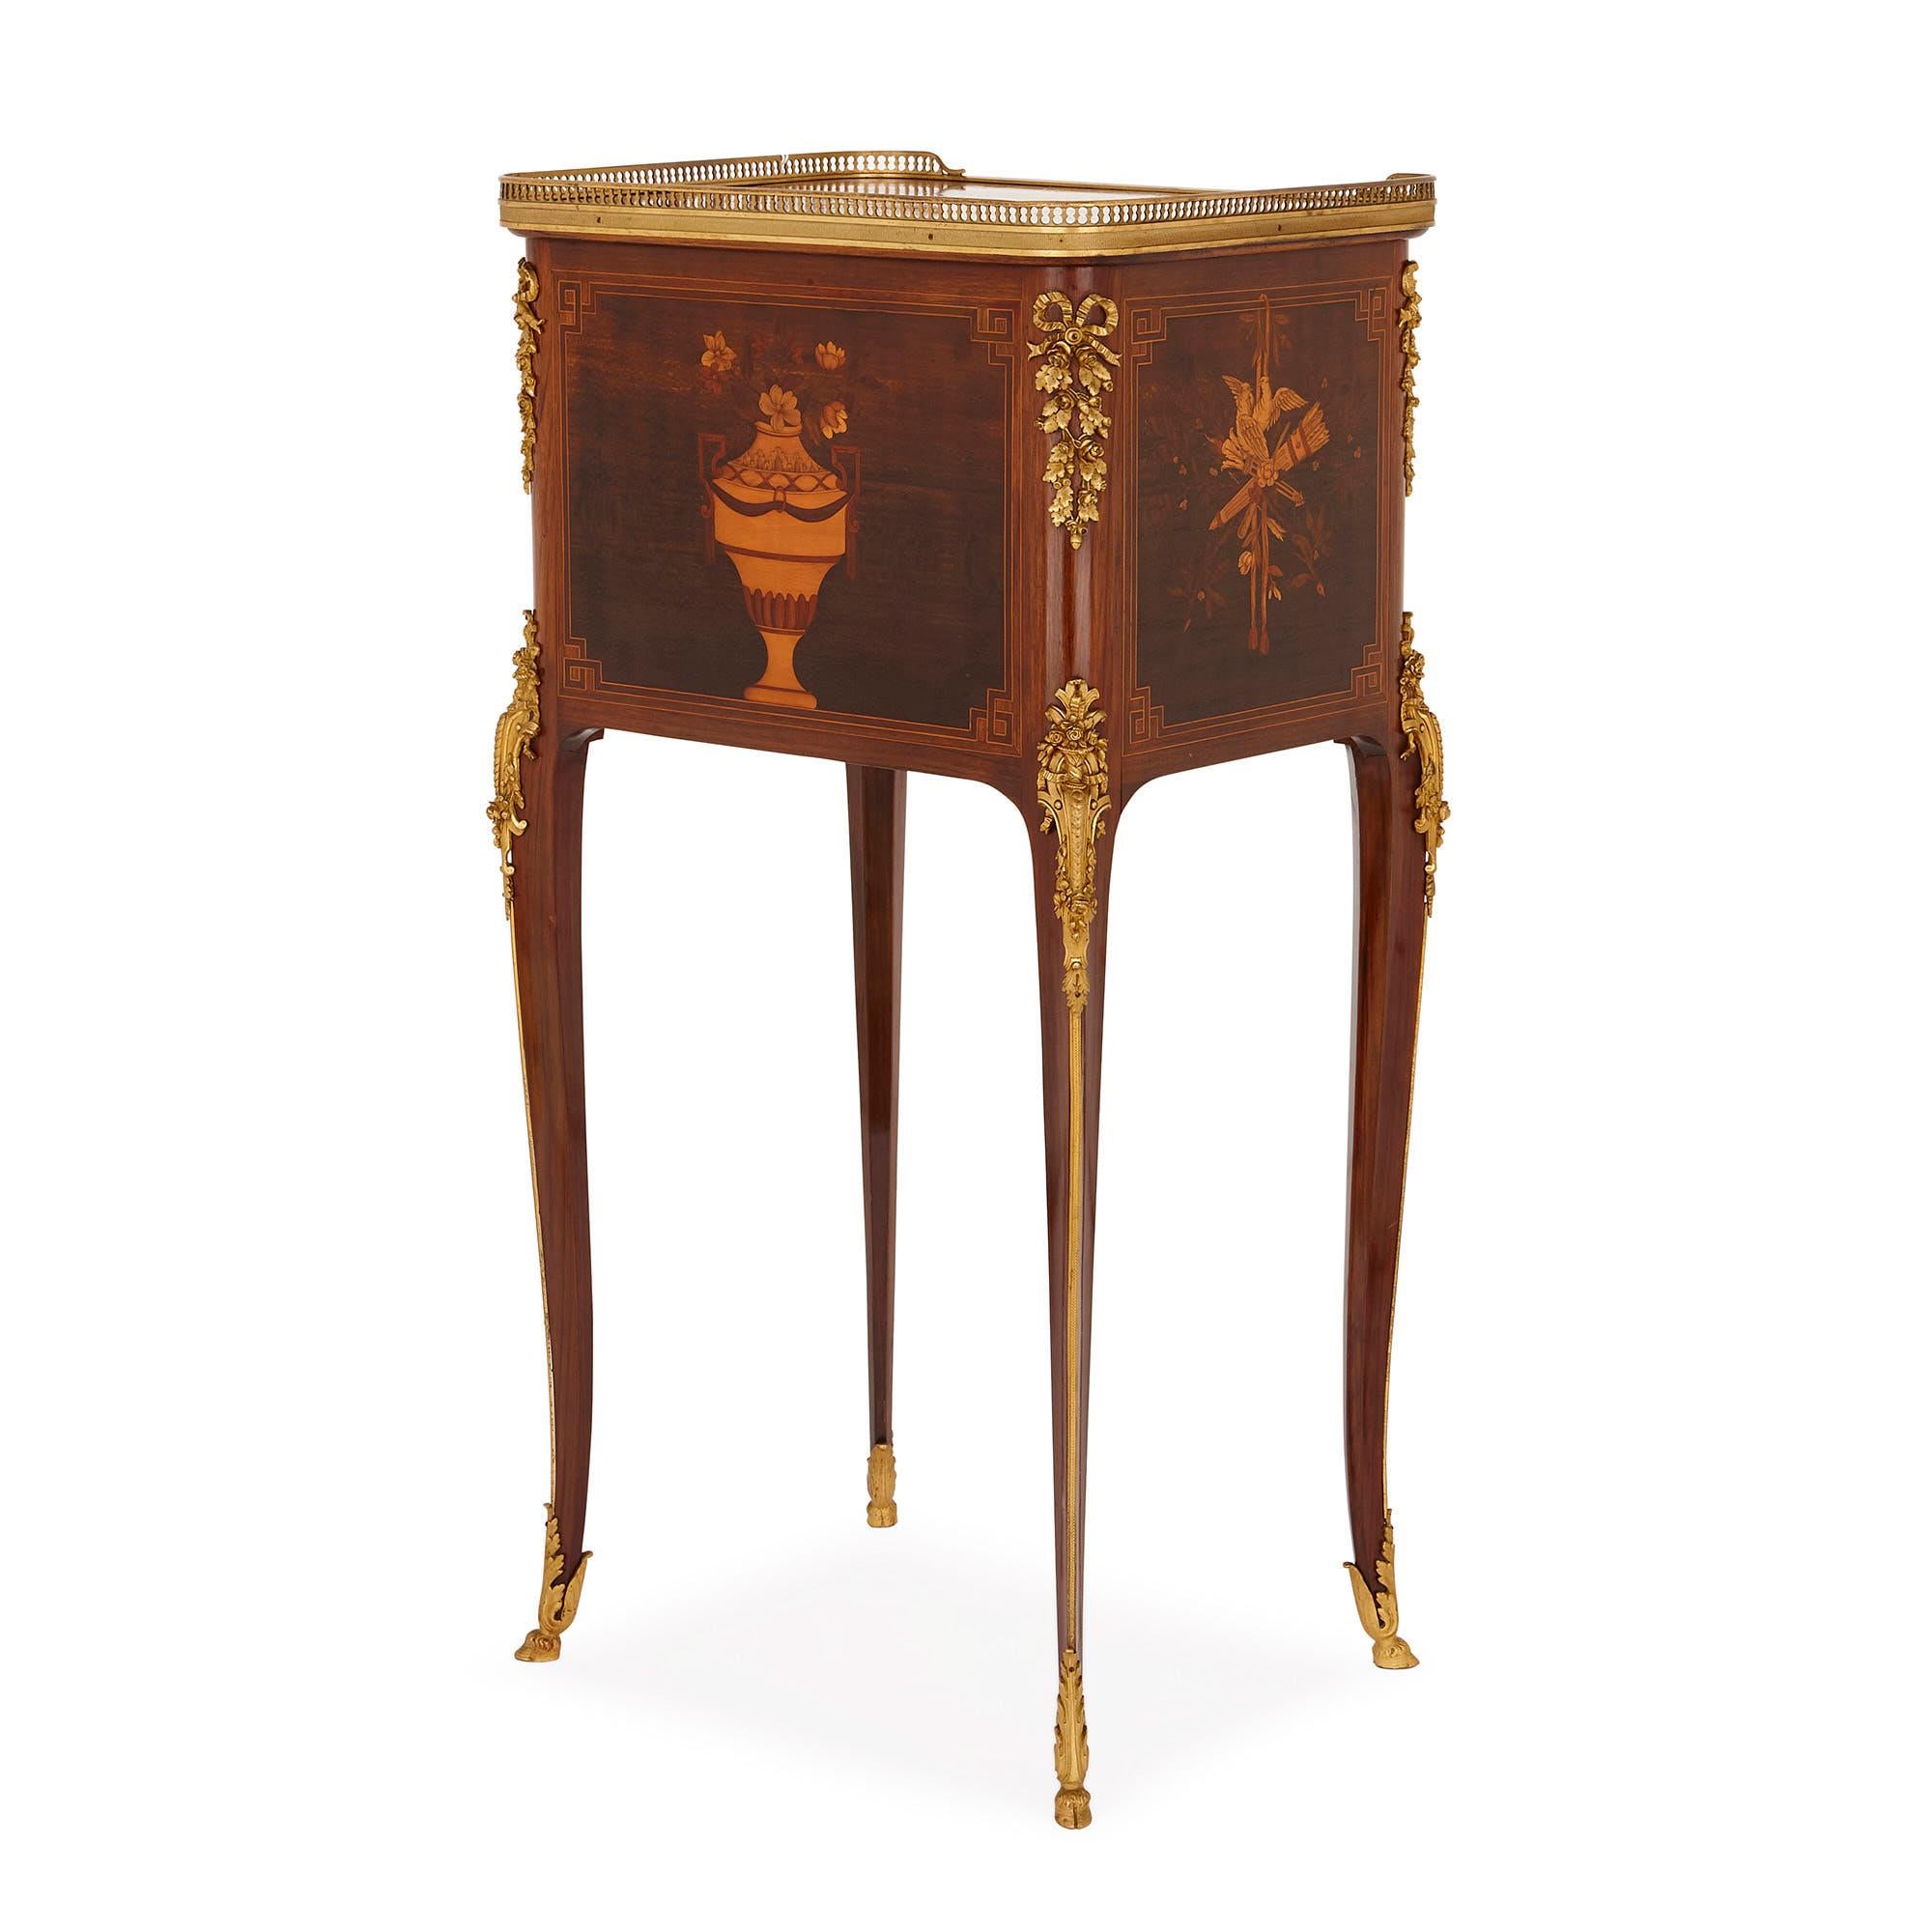 Neoclassical Antique gilt bronze mounted occasional table with marquetry panels For Sale